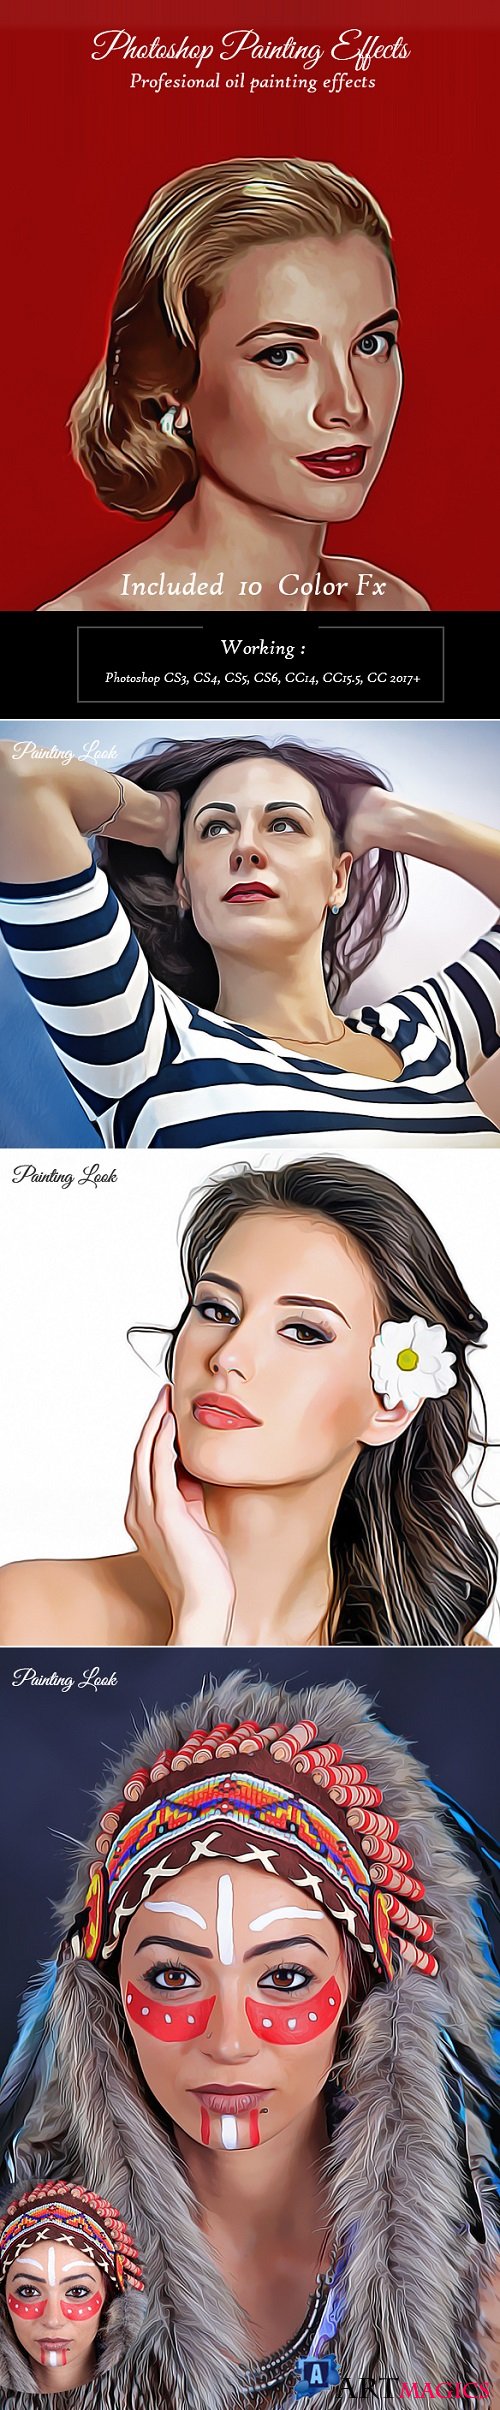 Photoshop Painting Effects 20659061